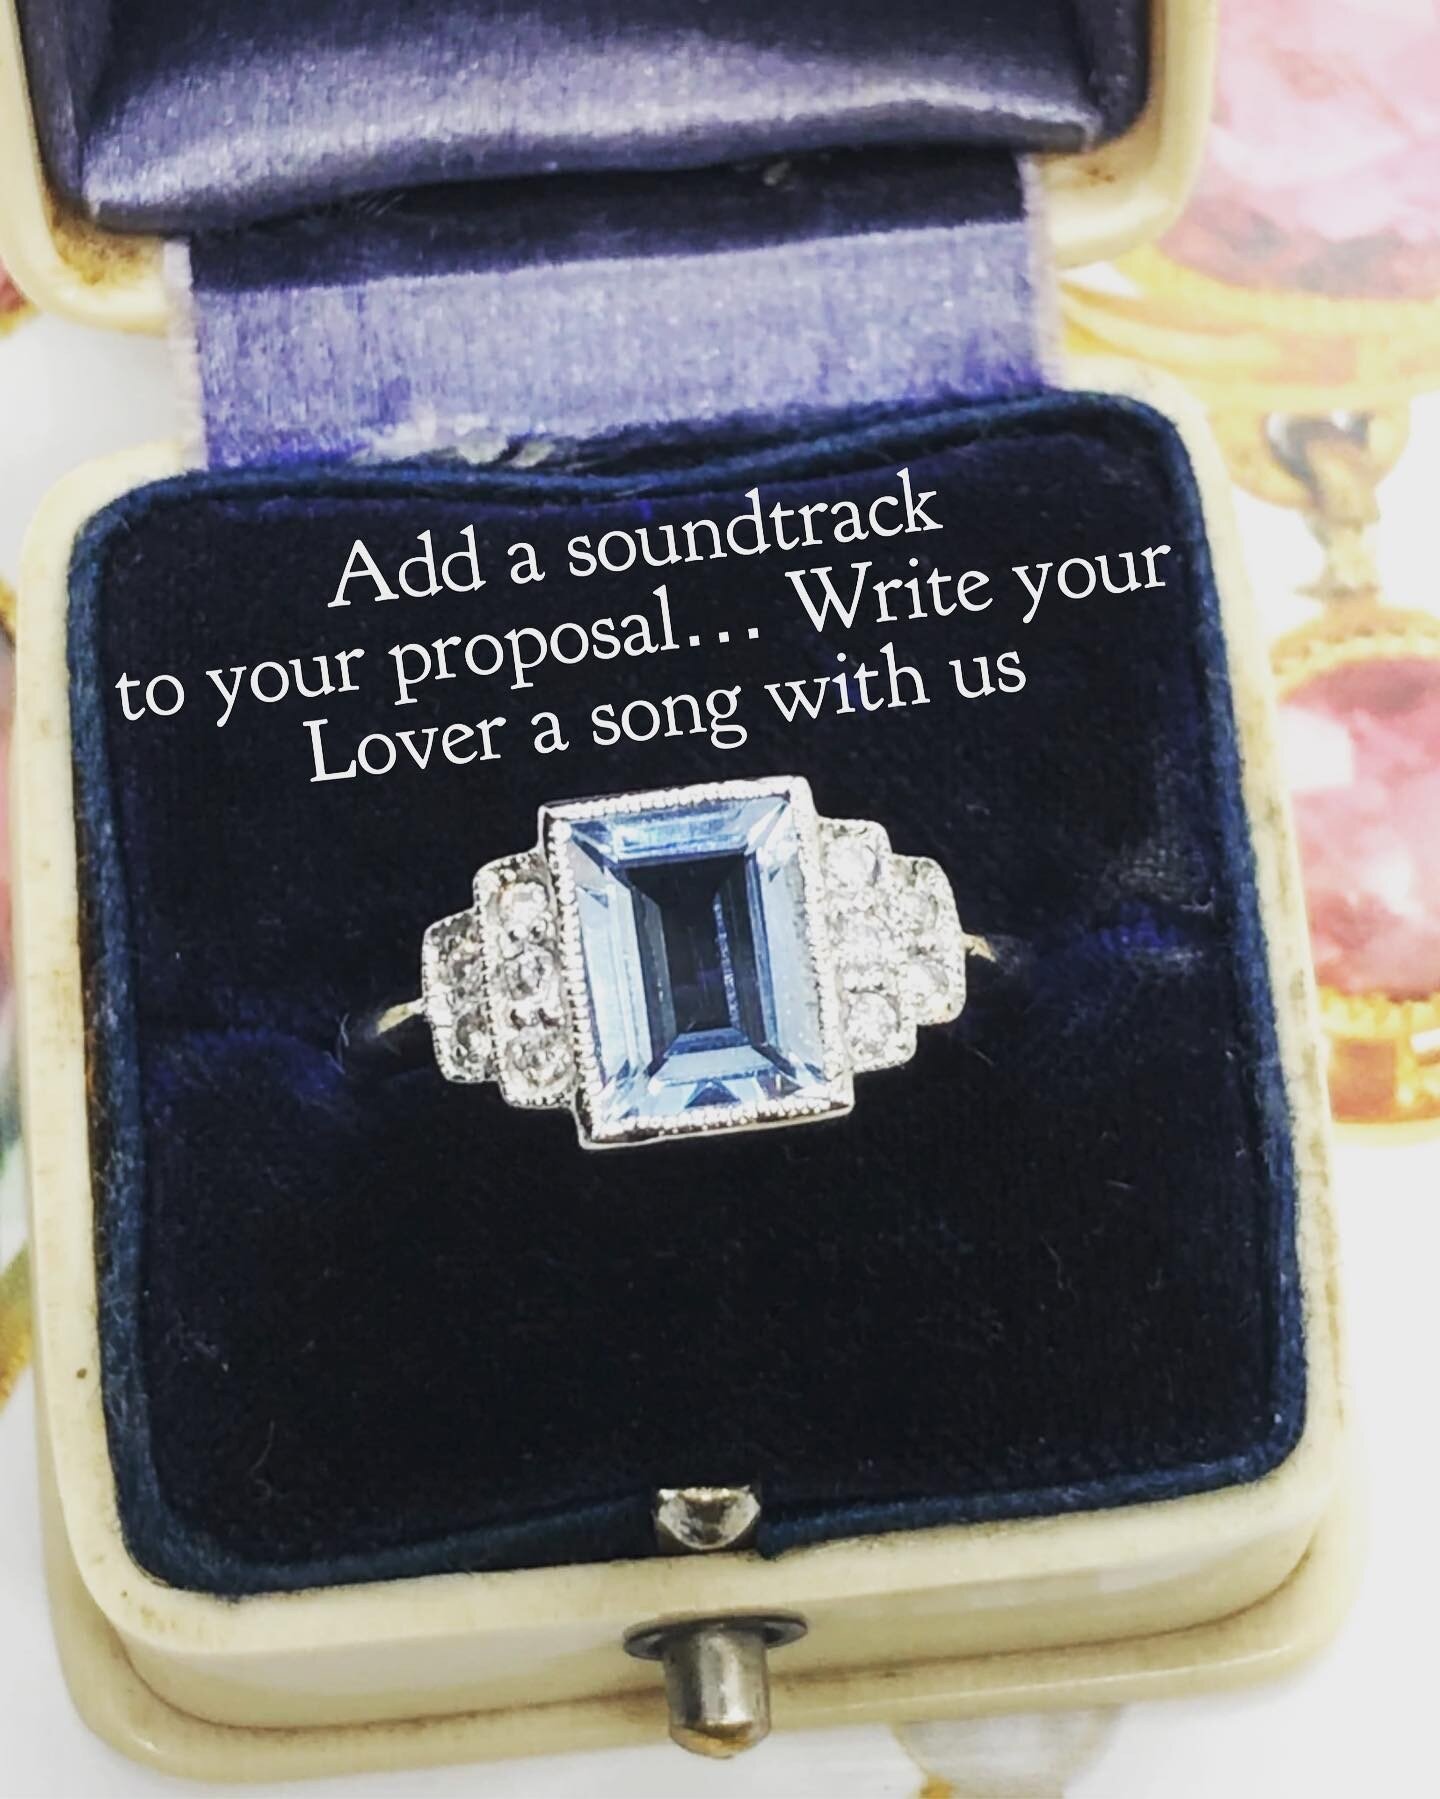 Planning a proposal this year? ❤️

Make a beautiful moment extra beautiful accompanied with a song written by Lark.

We are Grammy award writers and producers who write songs with you, songs for your loved ones, as gifts. Gifts that last forever. We 